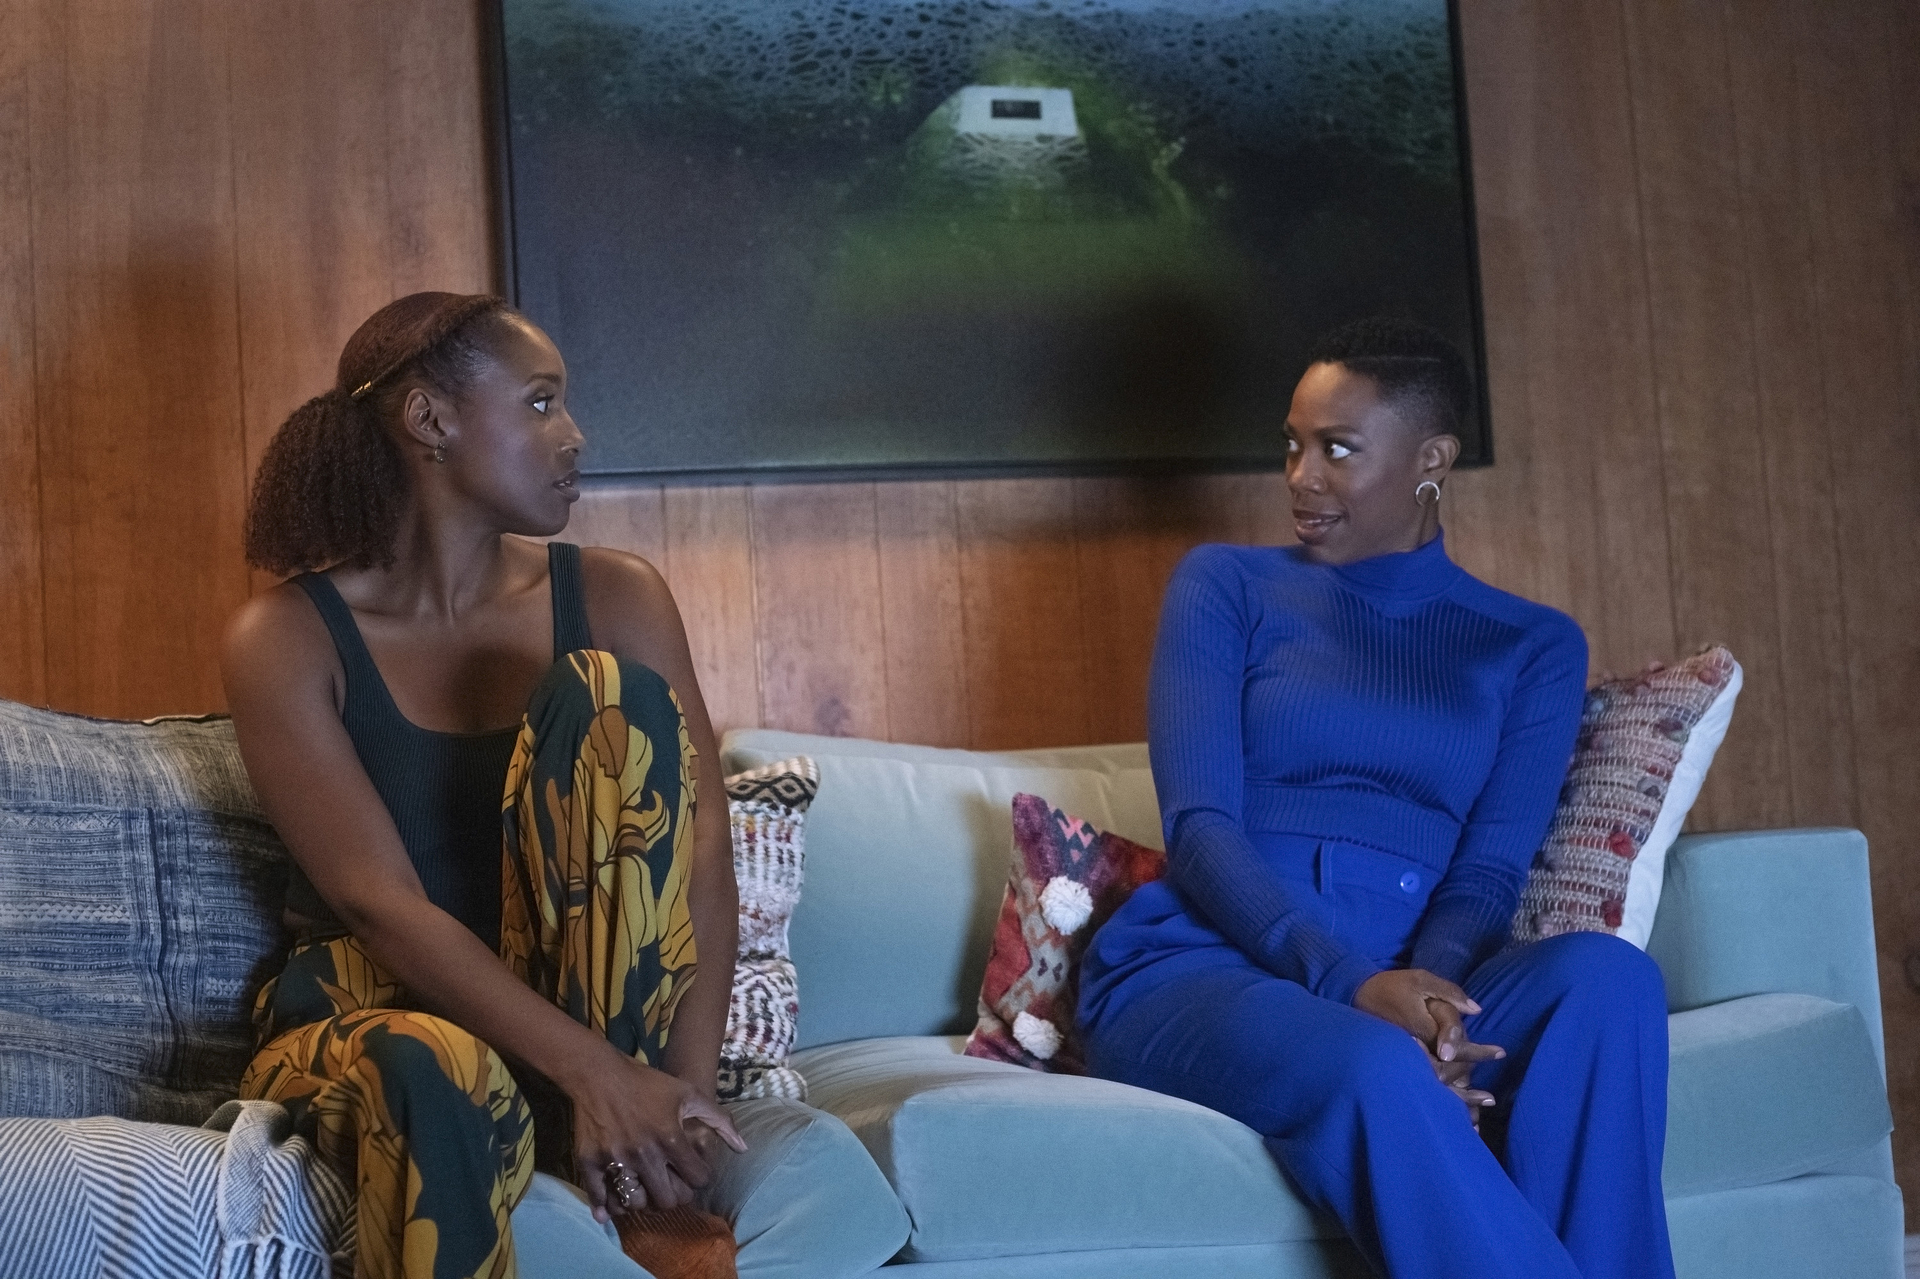 Issa Rae and Yvonne Orji in Insecure Season 5 Episode 2